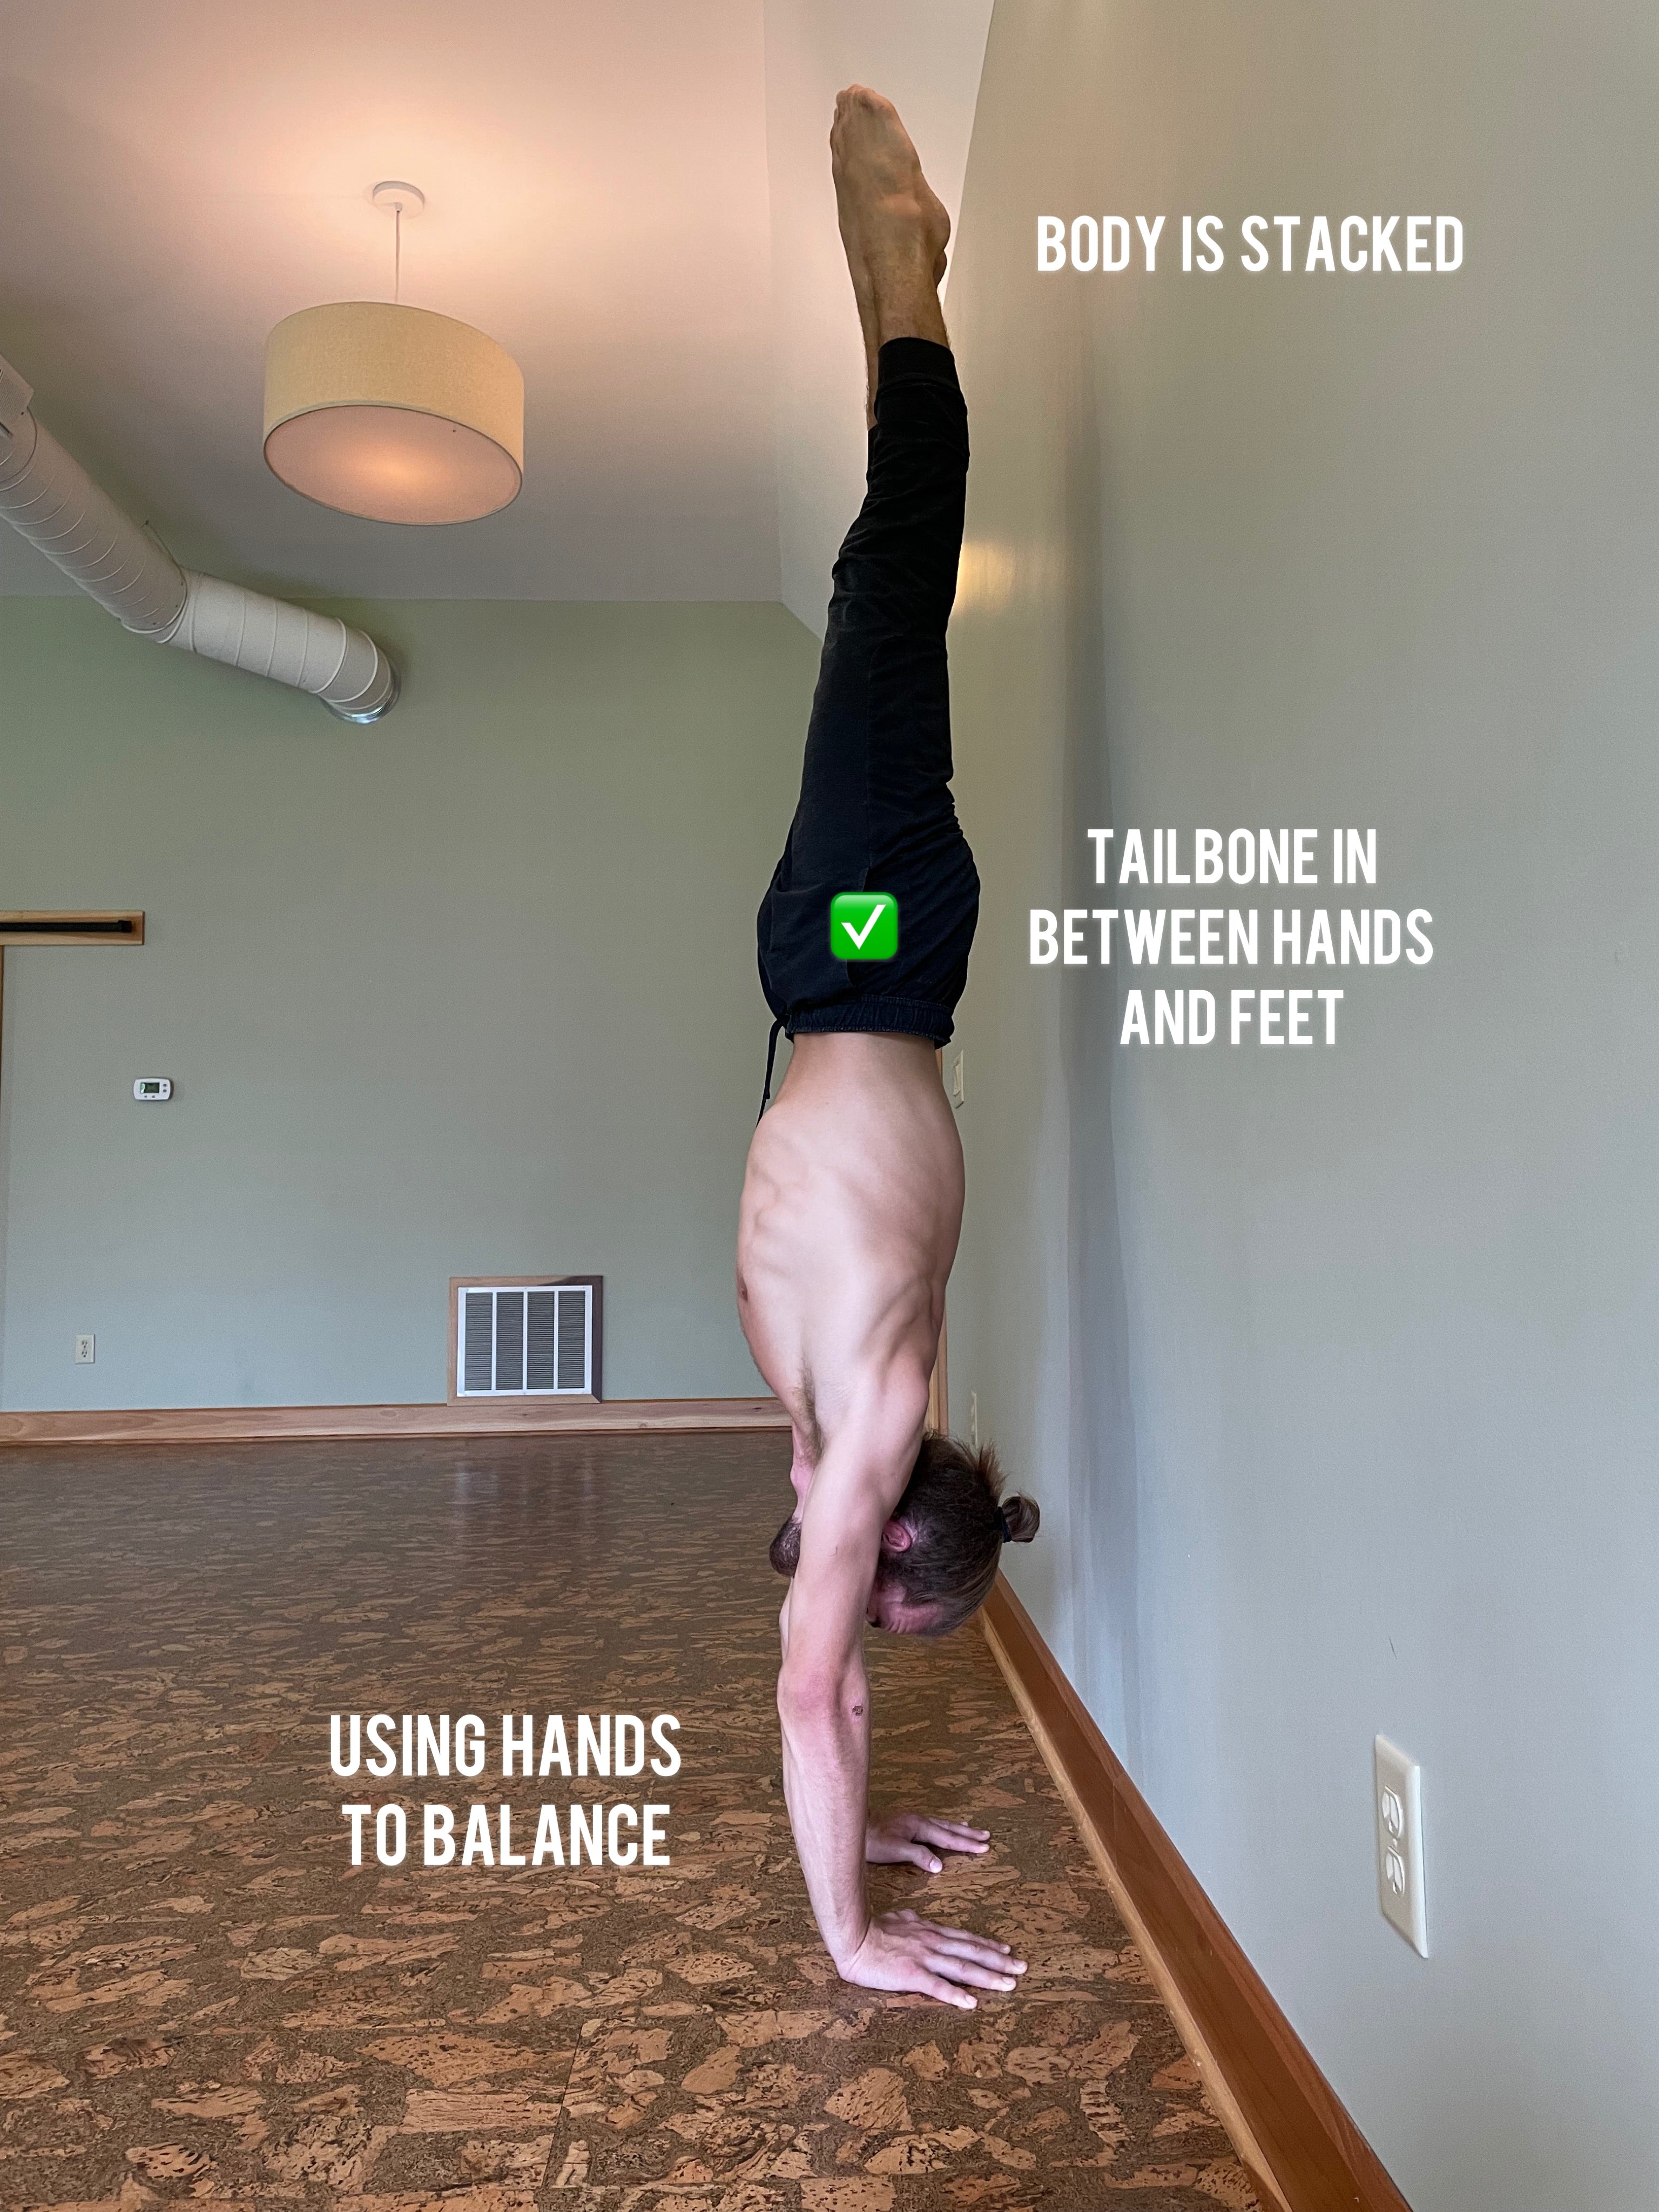 How to Handstand: 4 Simple Steps